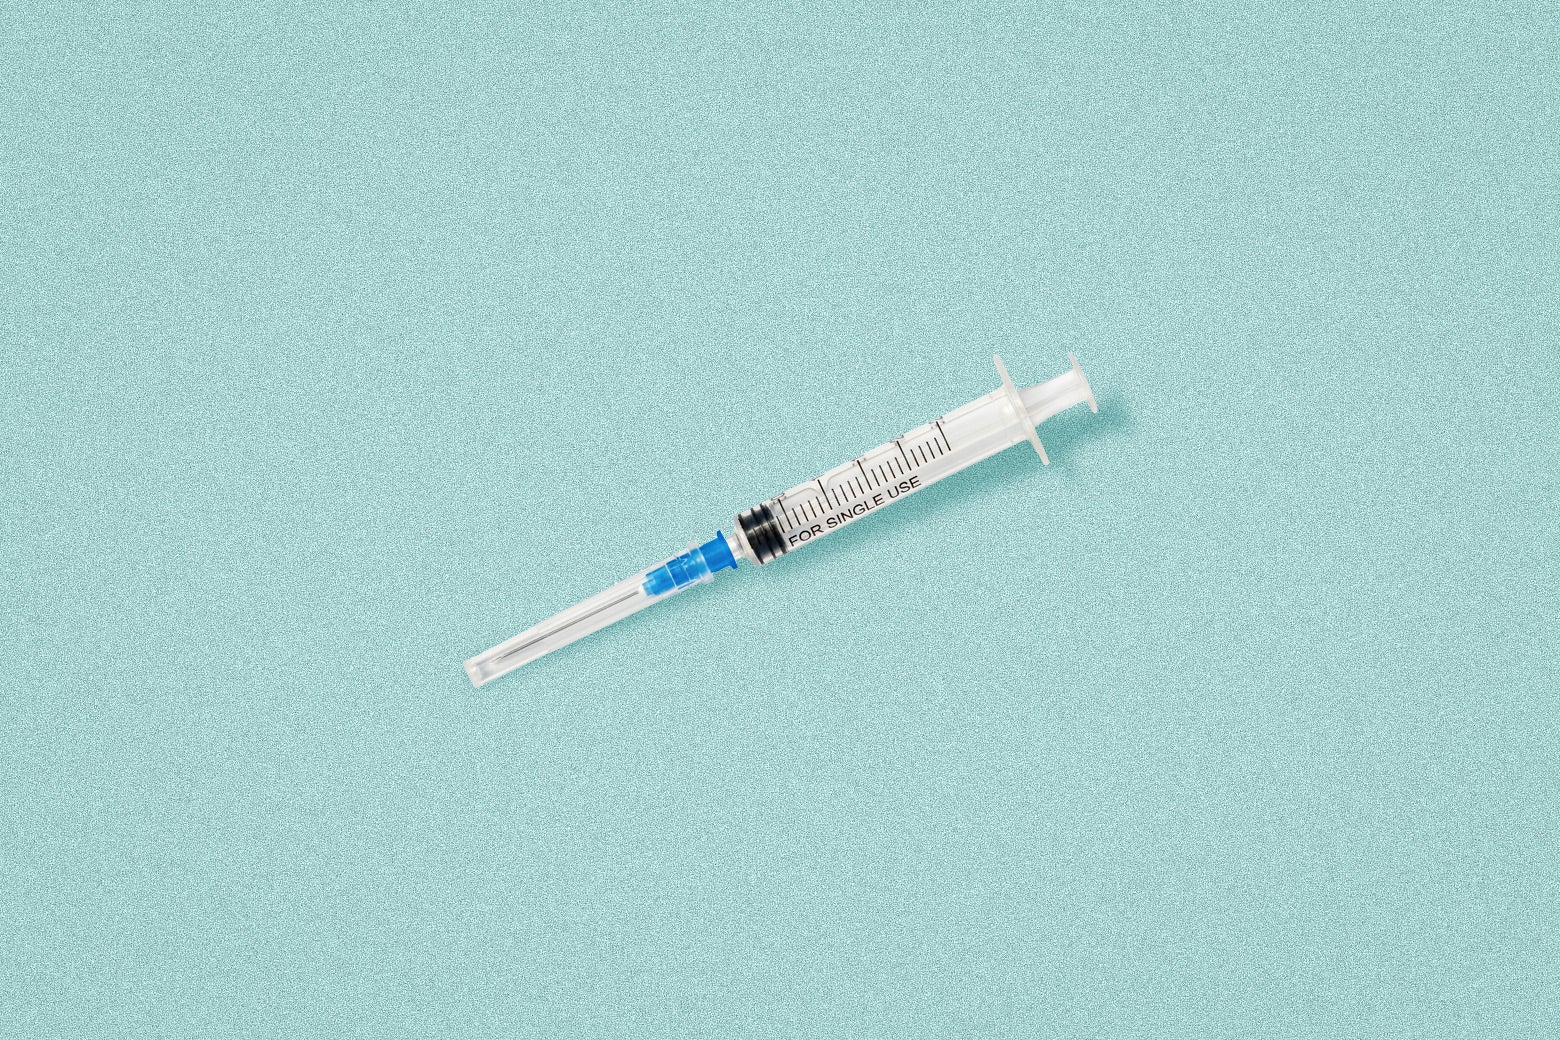 A new, packaged syringe against a calm blue background. 